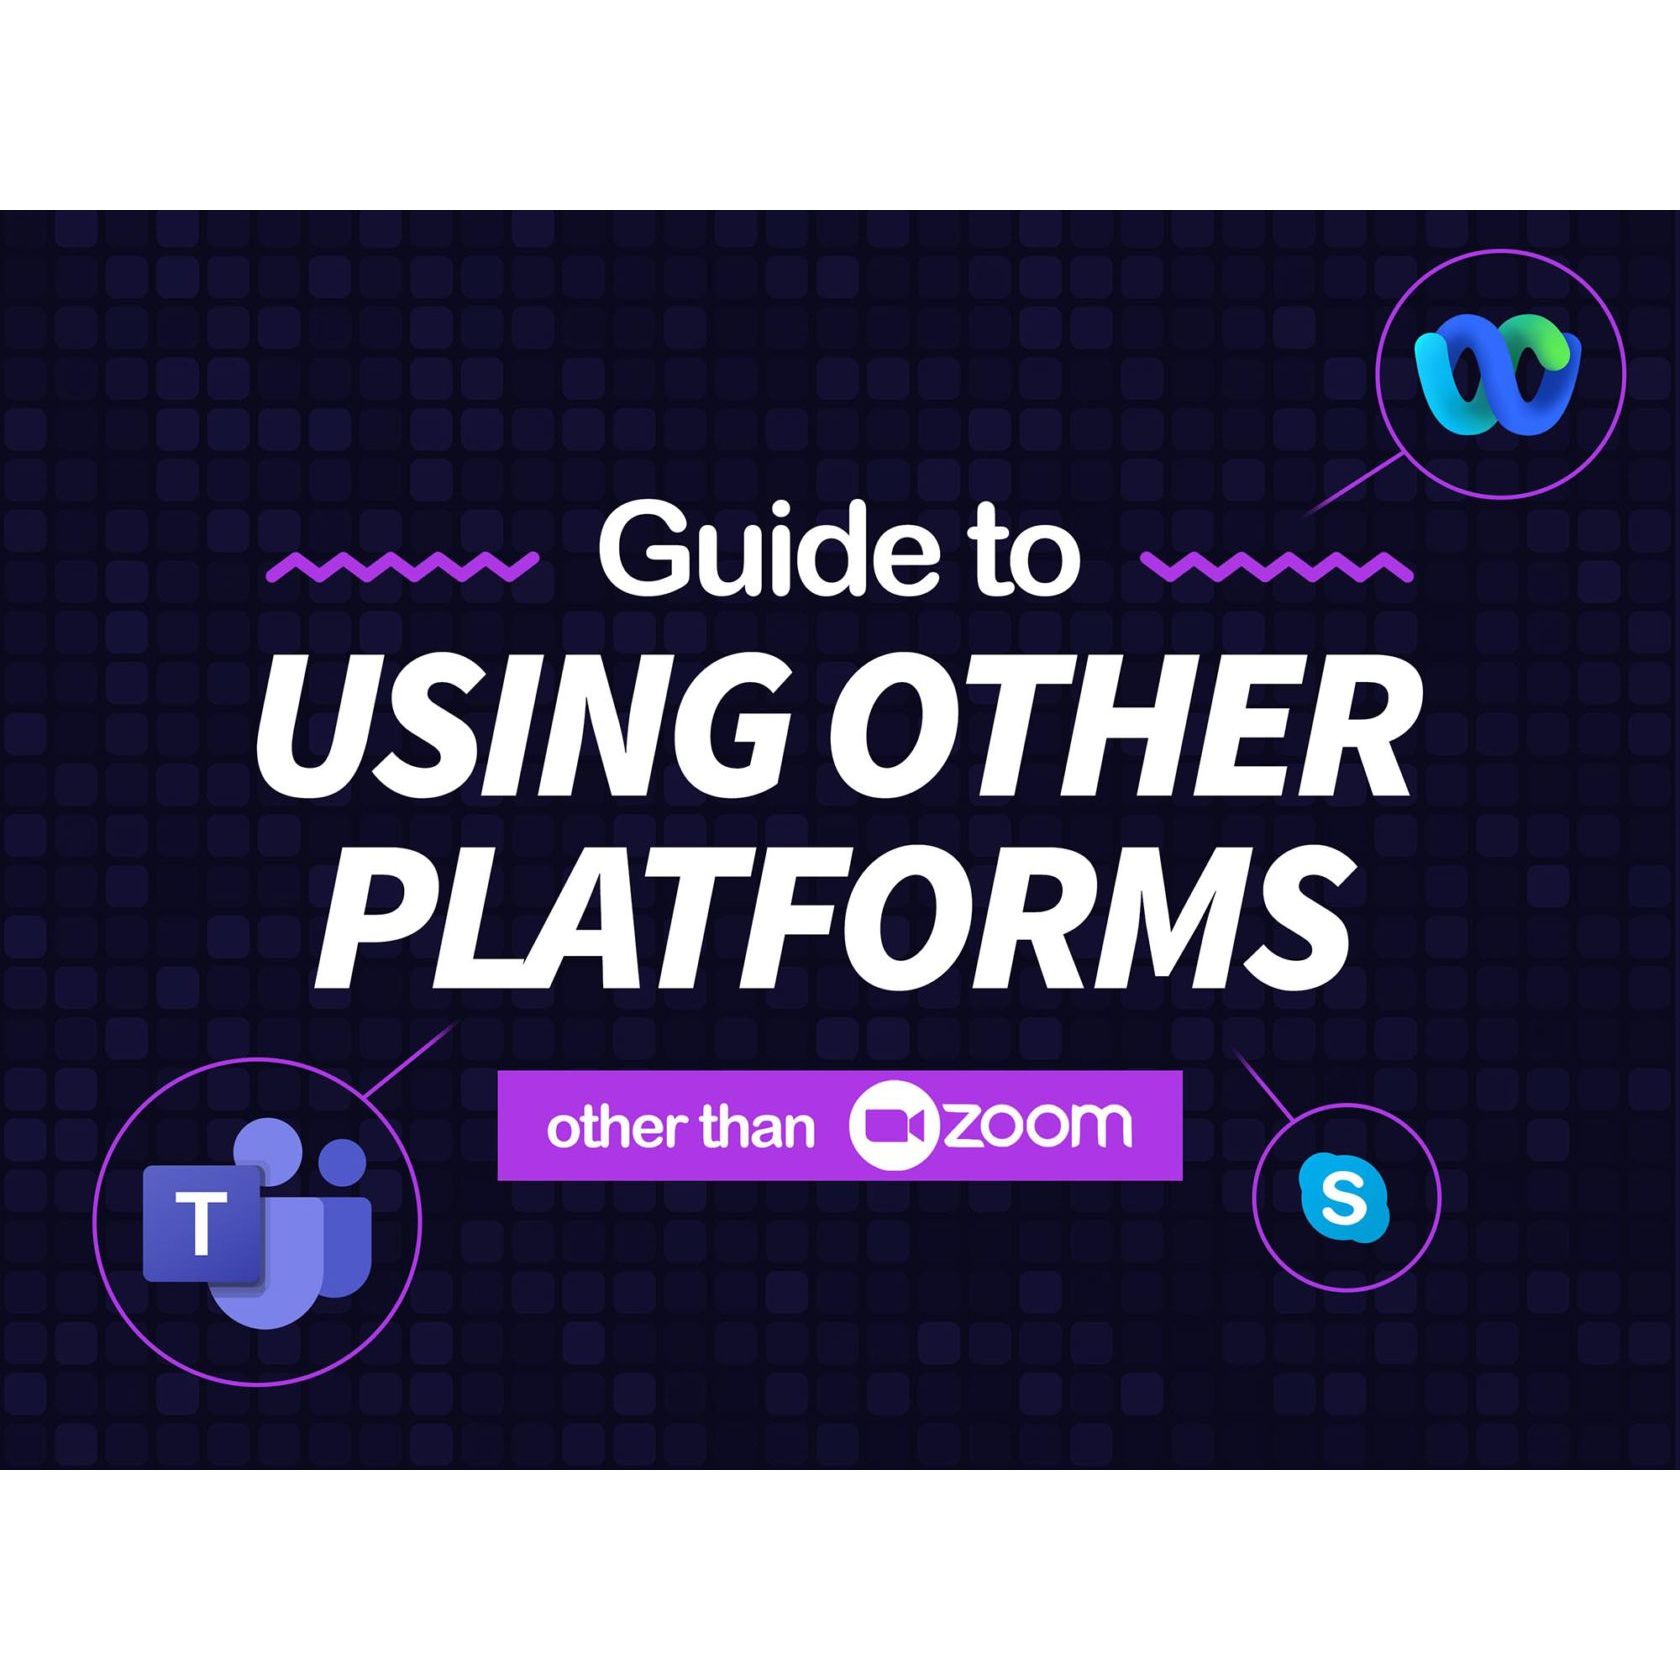 Guide on using other Platforms than Zoom